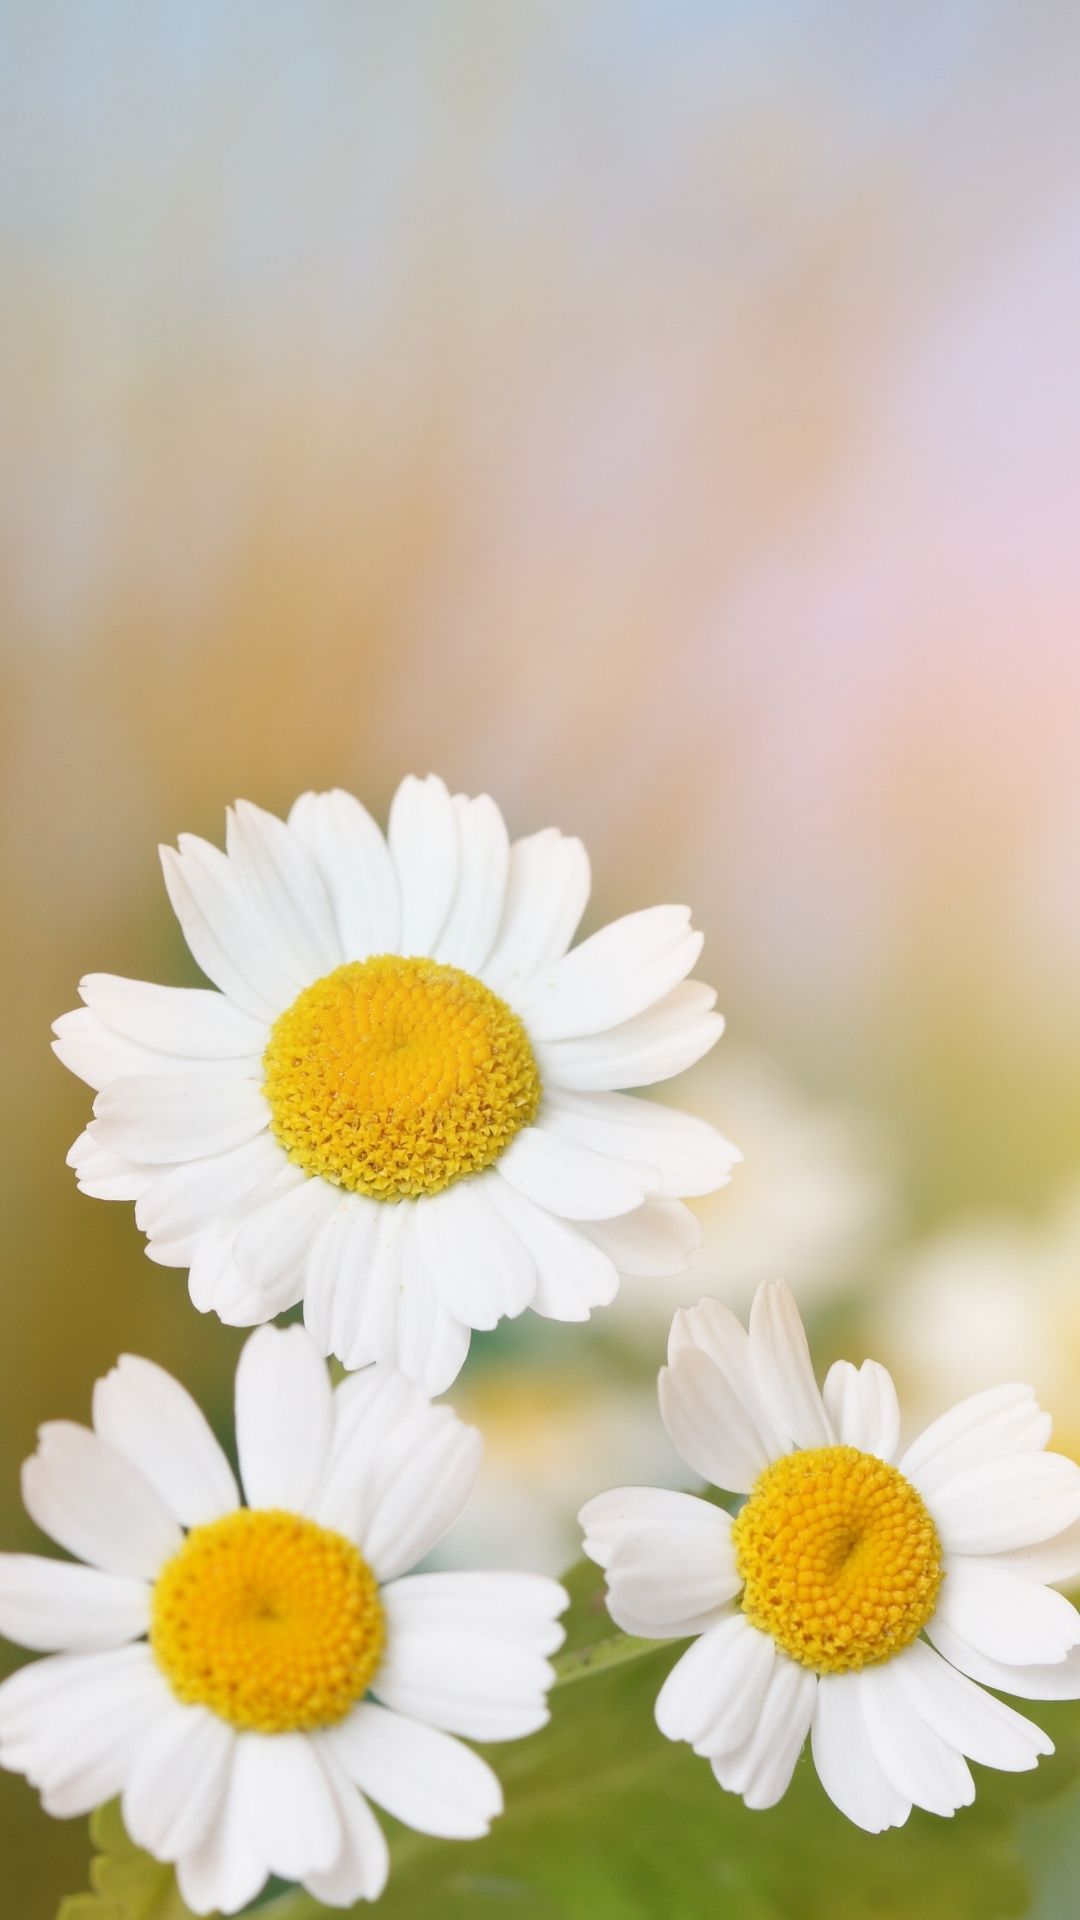 Three white daisies are in a field - Daisy